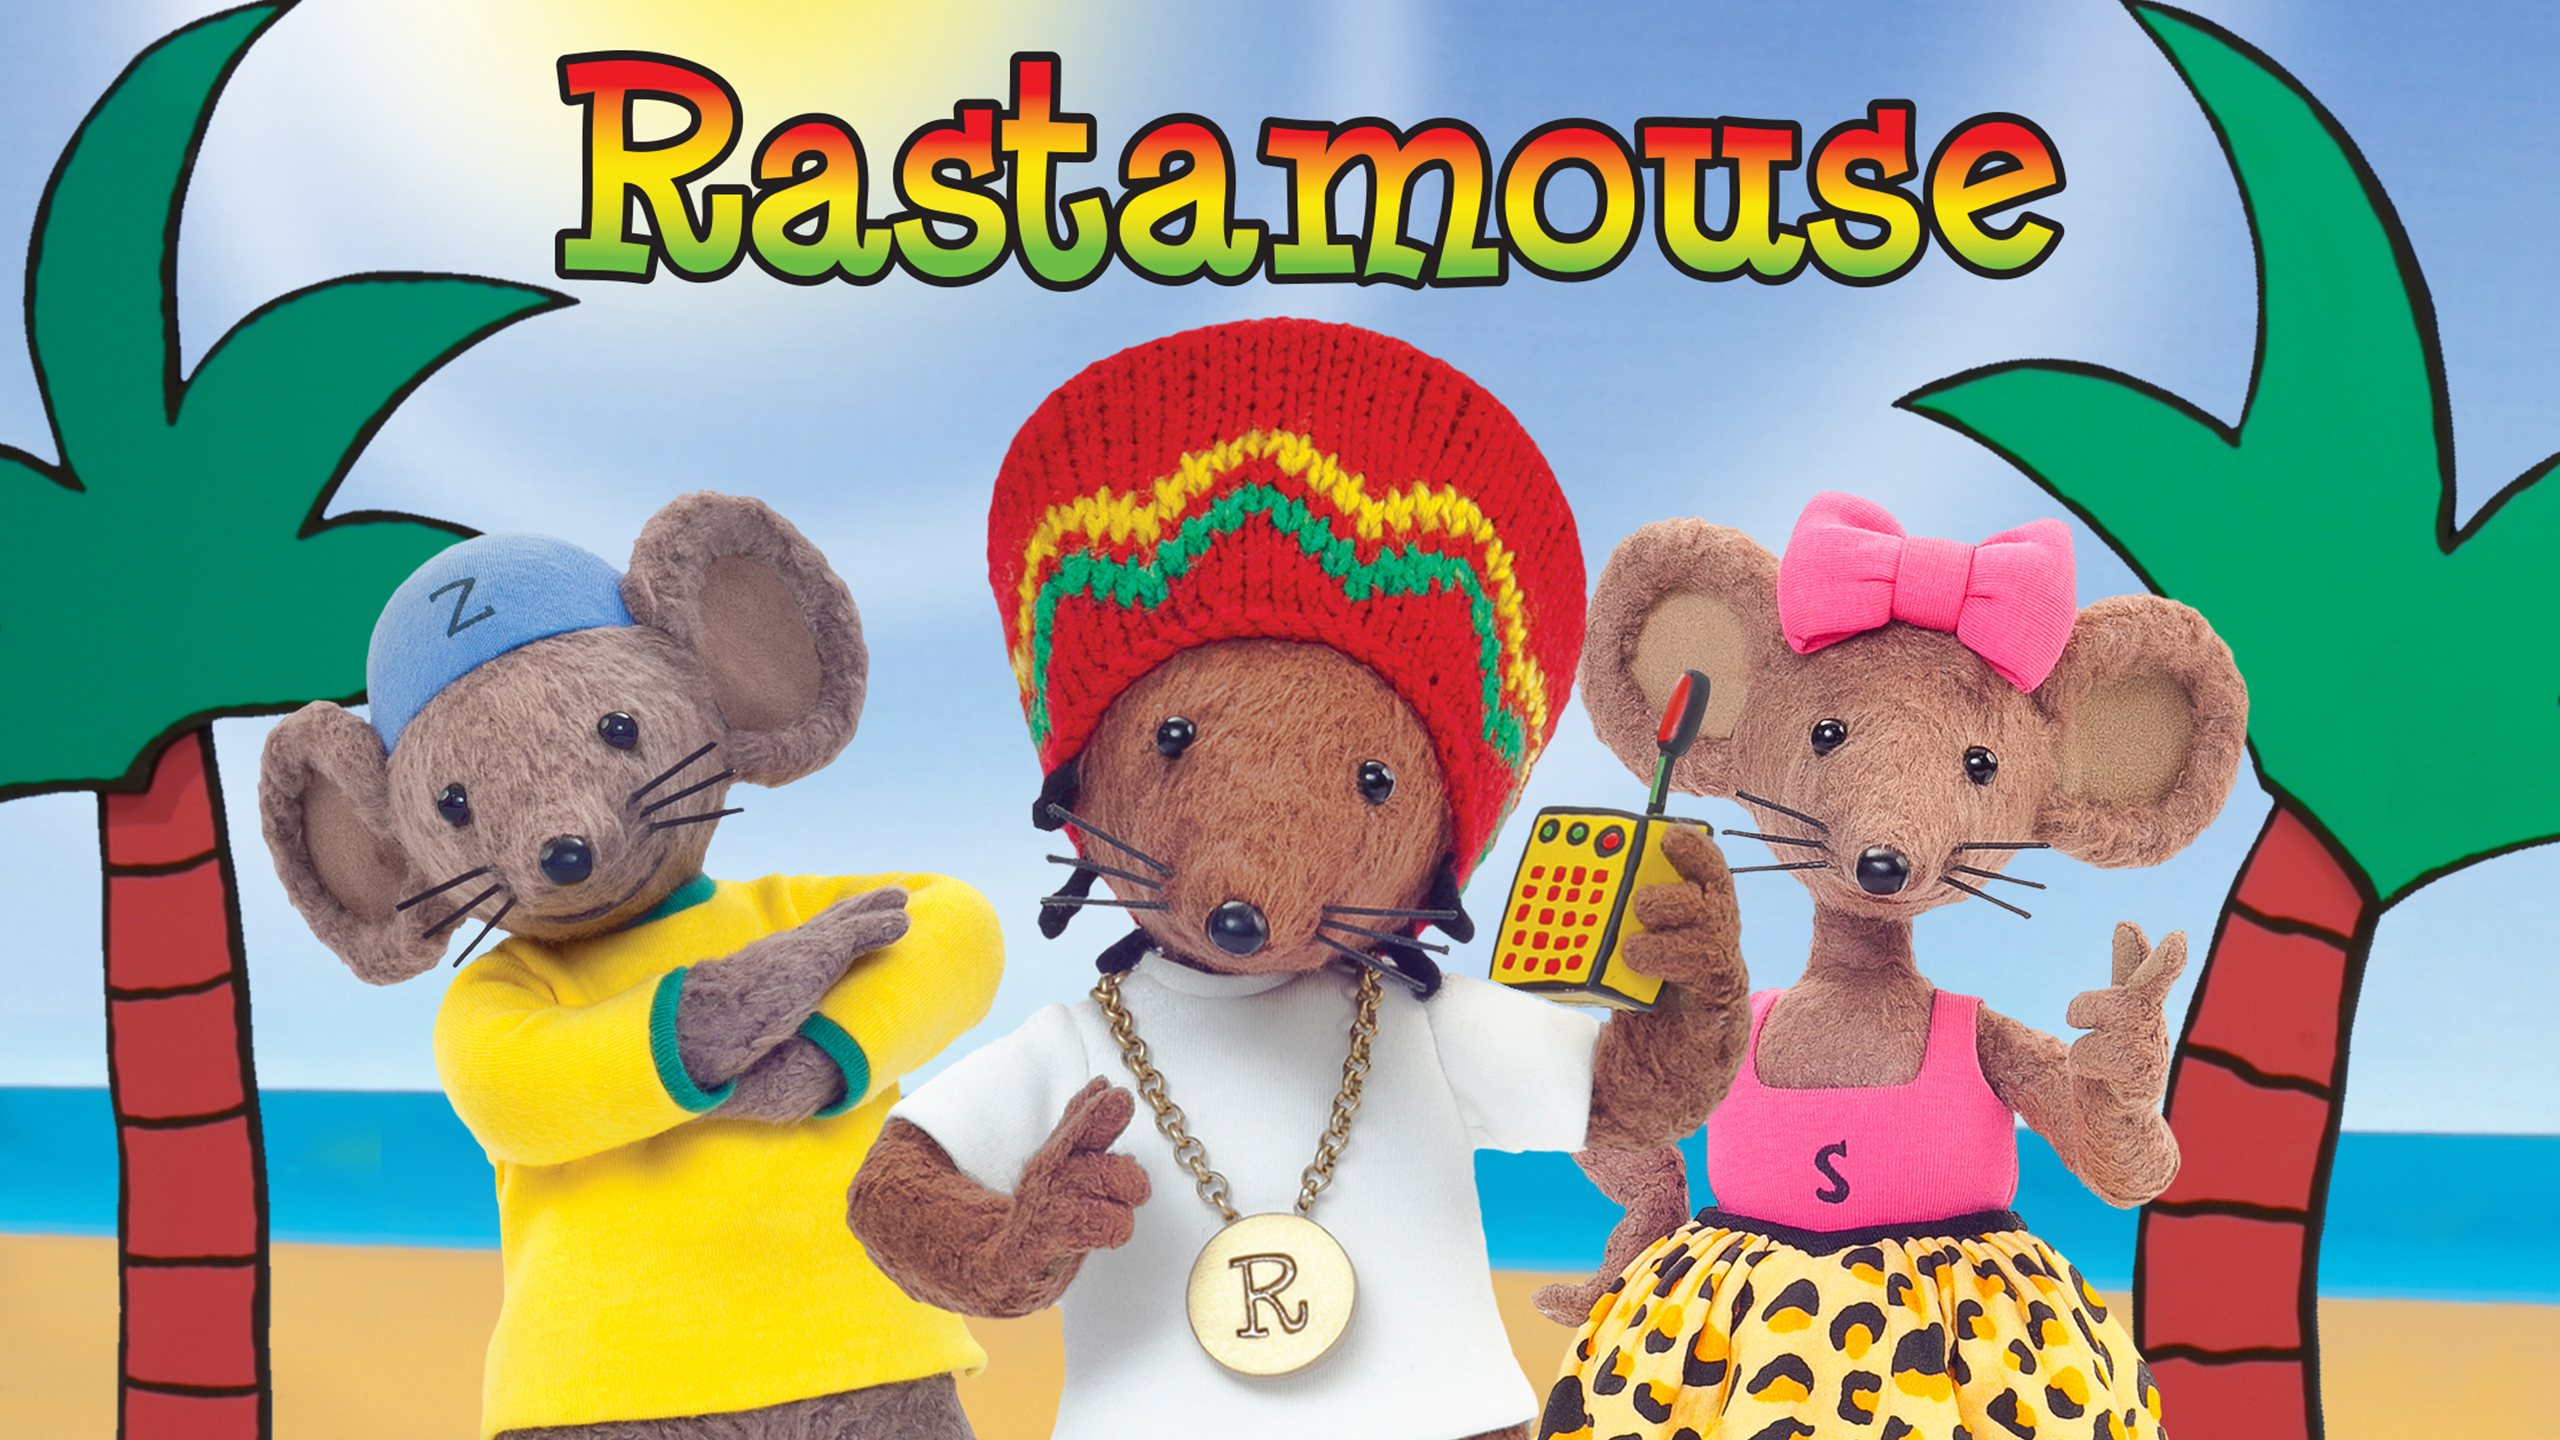 Fatherhood²: The trouble with Rastamouse is... not yet clear to me! |  Camping with the Mediocre Dad